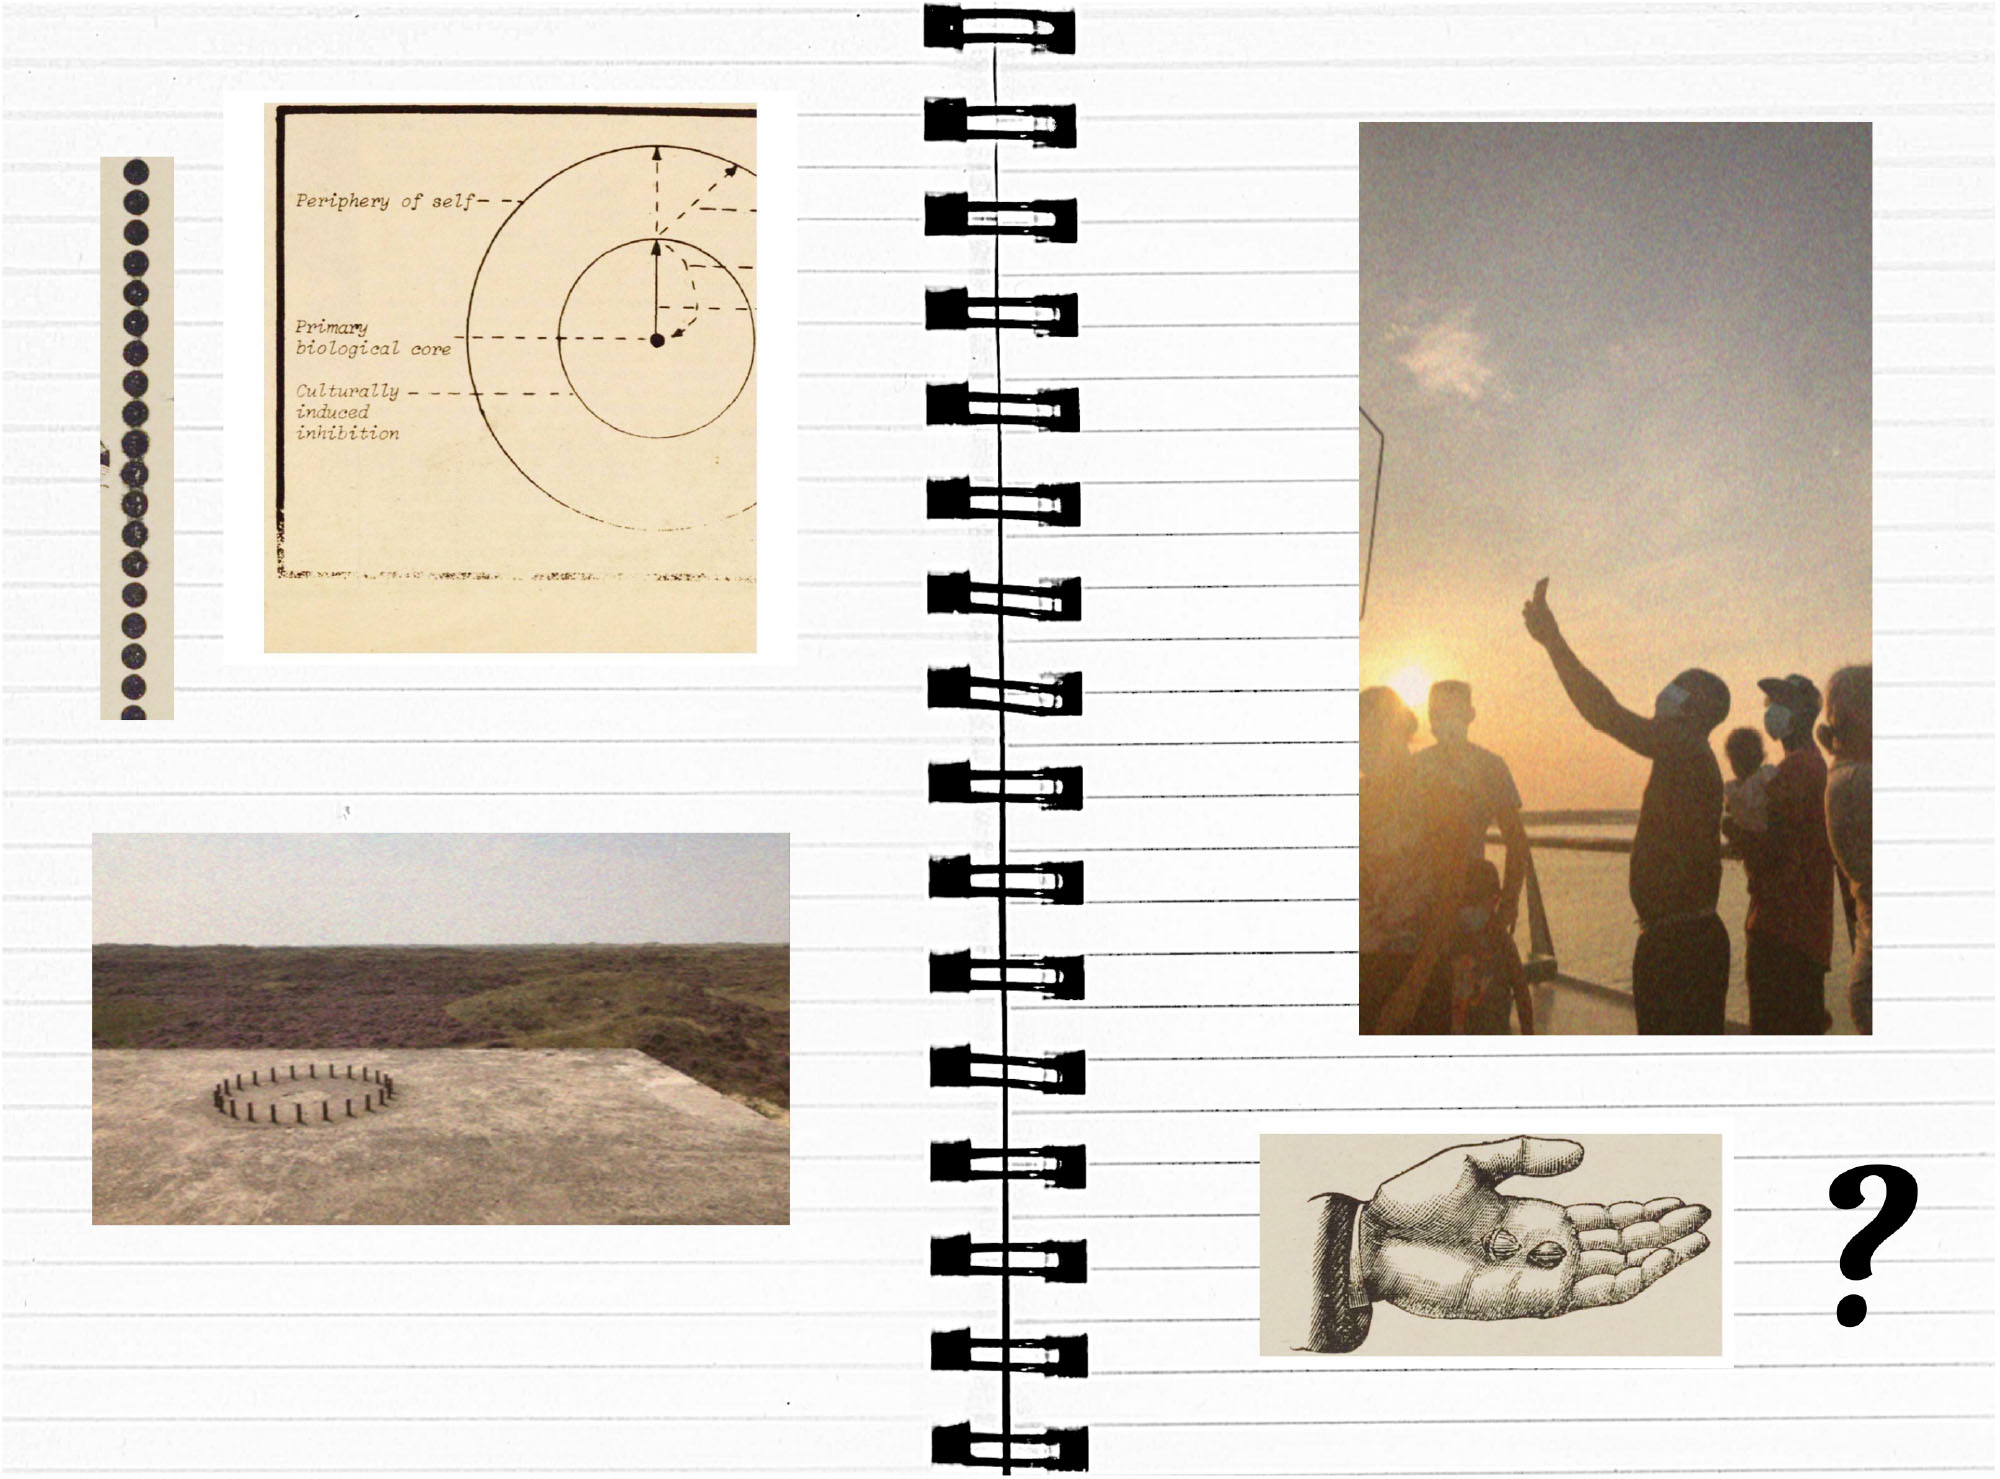 exmouth_scrapbook_notes_on_utopia_final_version-14